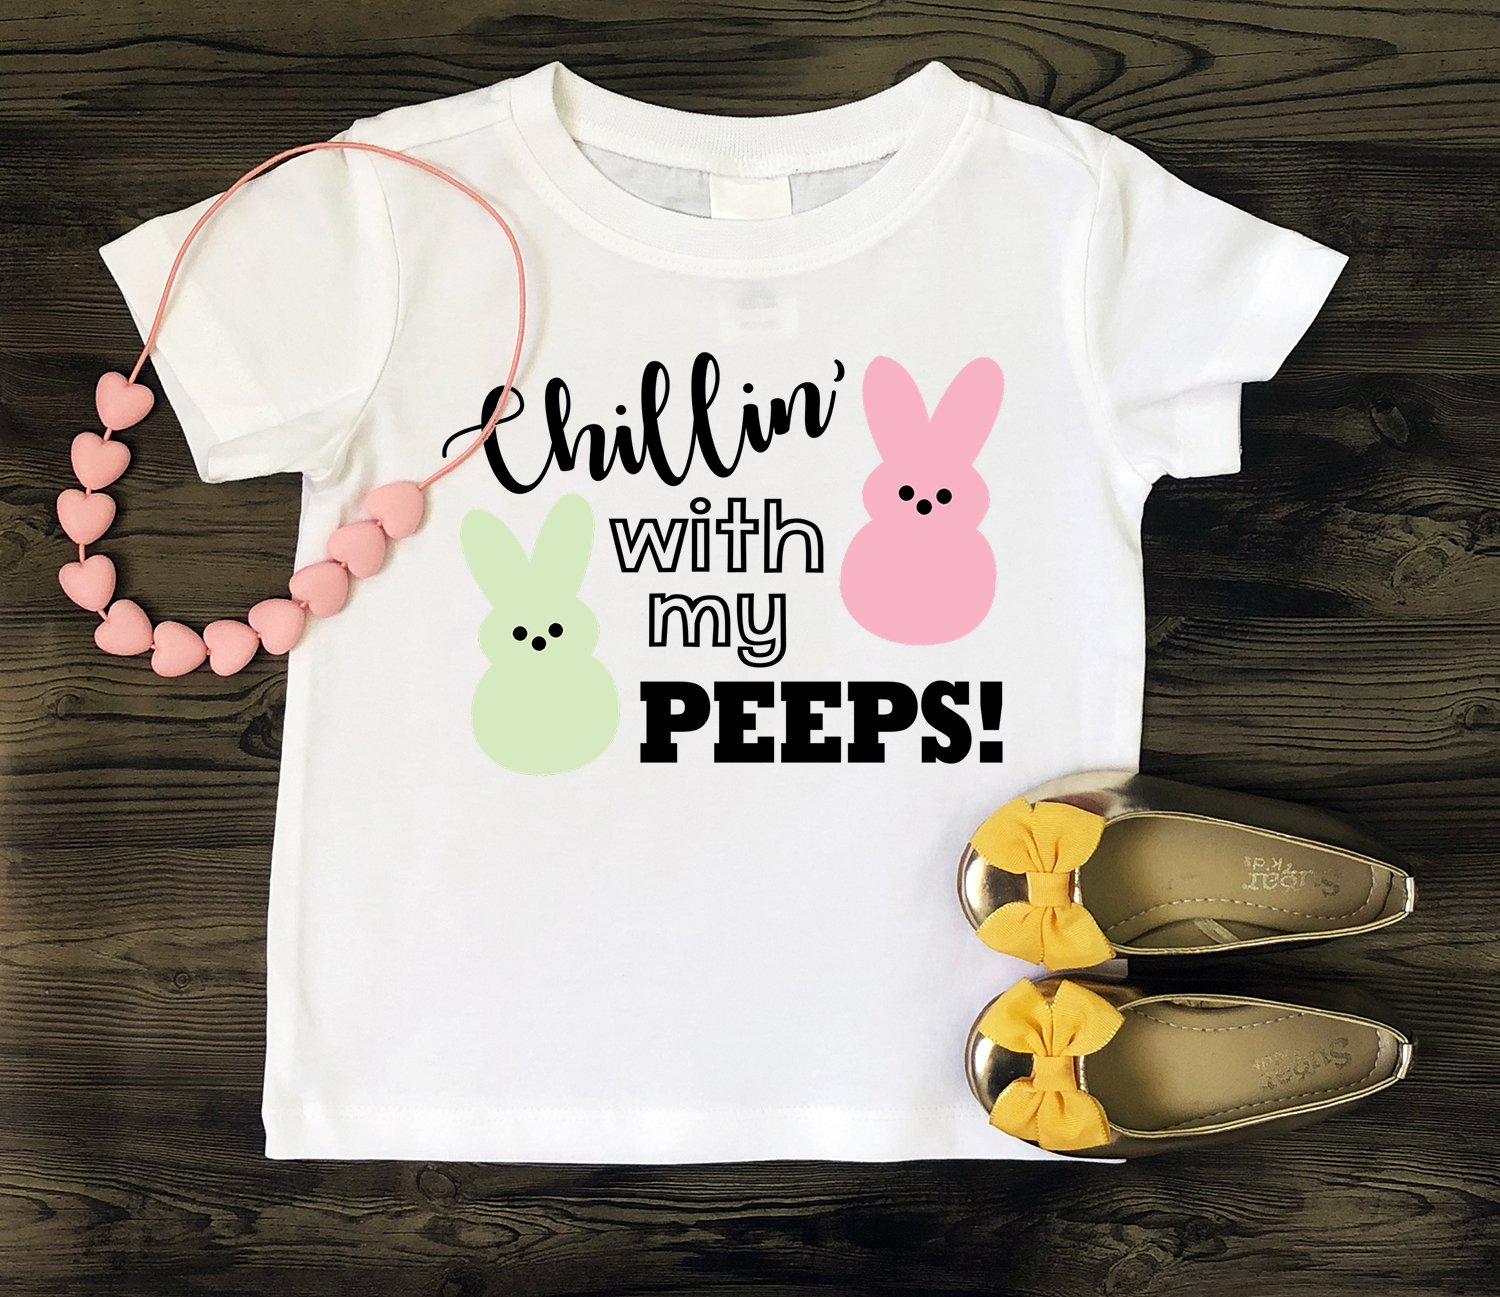 White kids t-shirt with "Chillin' with My Peeps" design - Easter SVG file